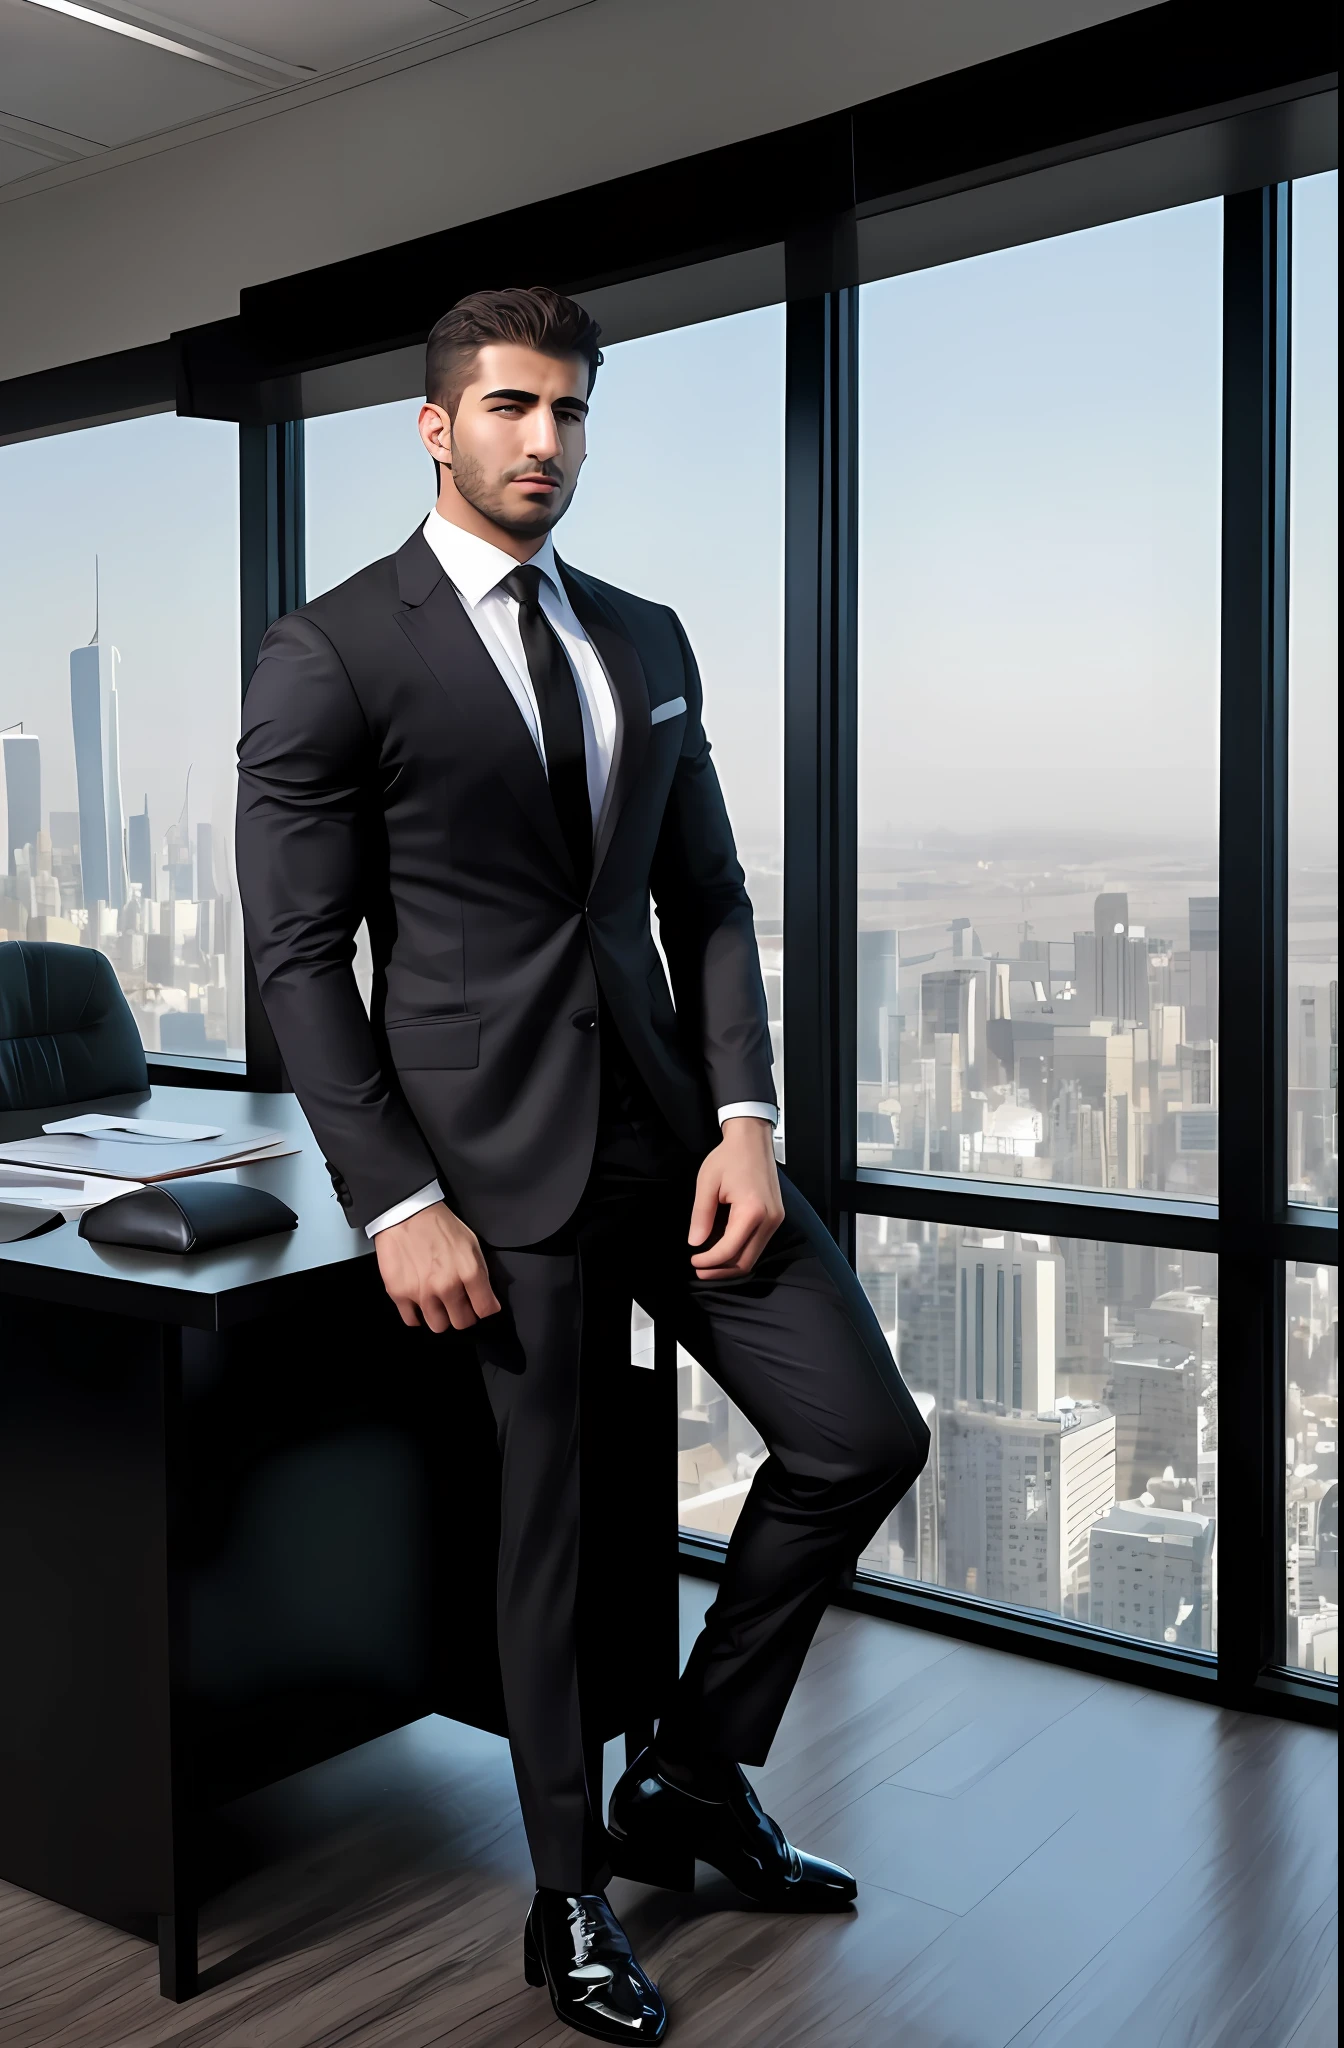 An attractive, muscular, and confident Middle Eastern man sits powerfully in his office, donning a sleek black business suit with a white tie. Windows frame a stunning cityscape behind him. Full body shot of a 25 year old male, with a slightly plump build and strongly resembles Chris Redfield.